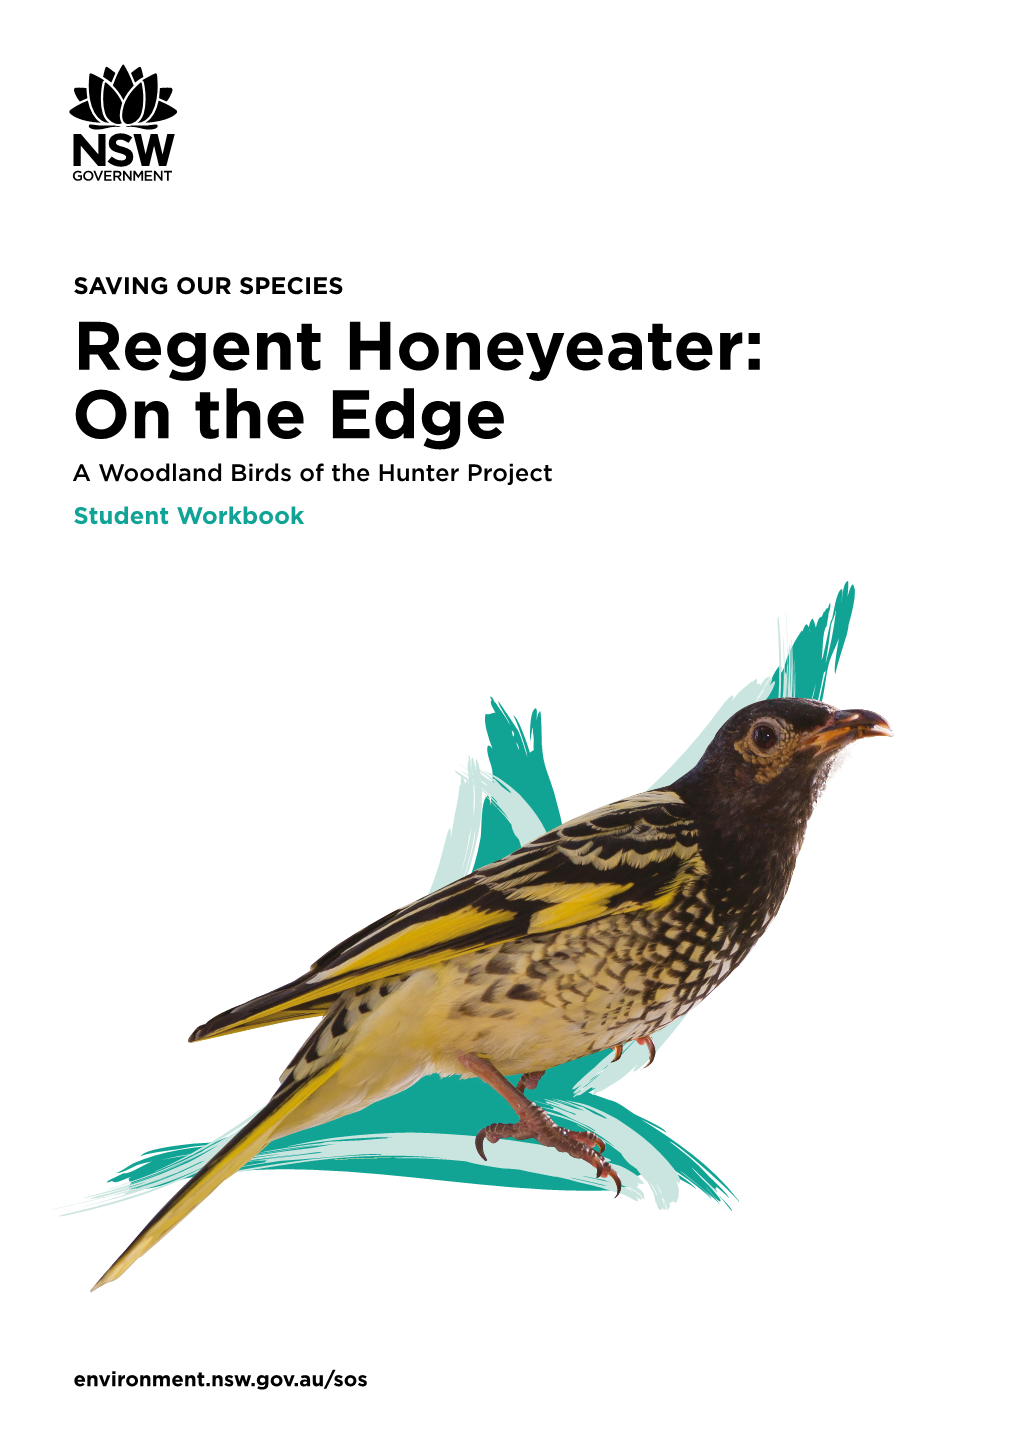 Regent Honeyeater: on the Edge a Woodland Birds of the Hunter Project Student Workbook